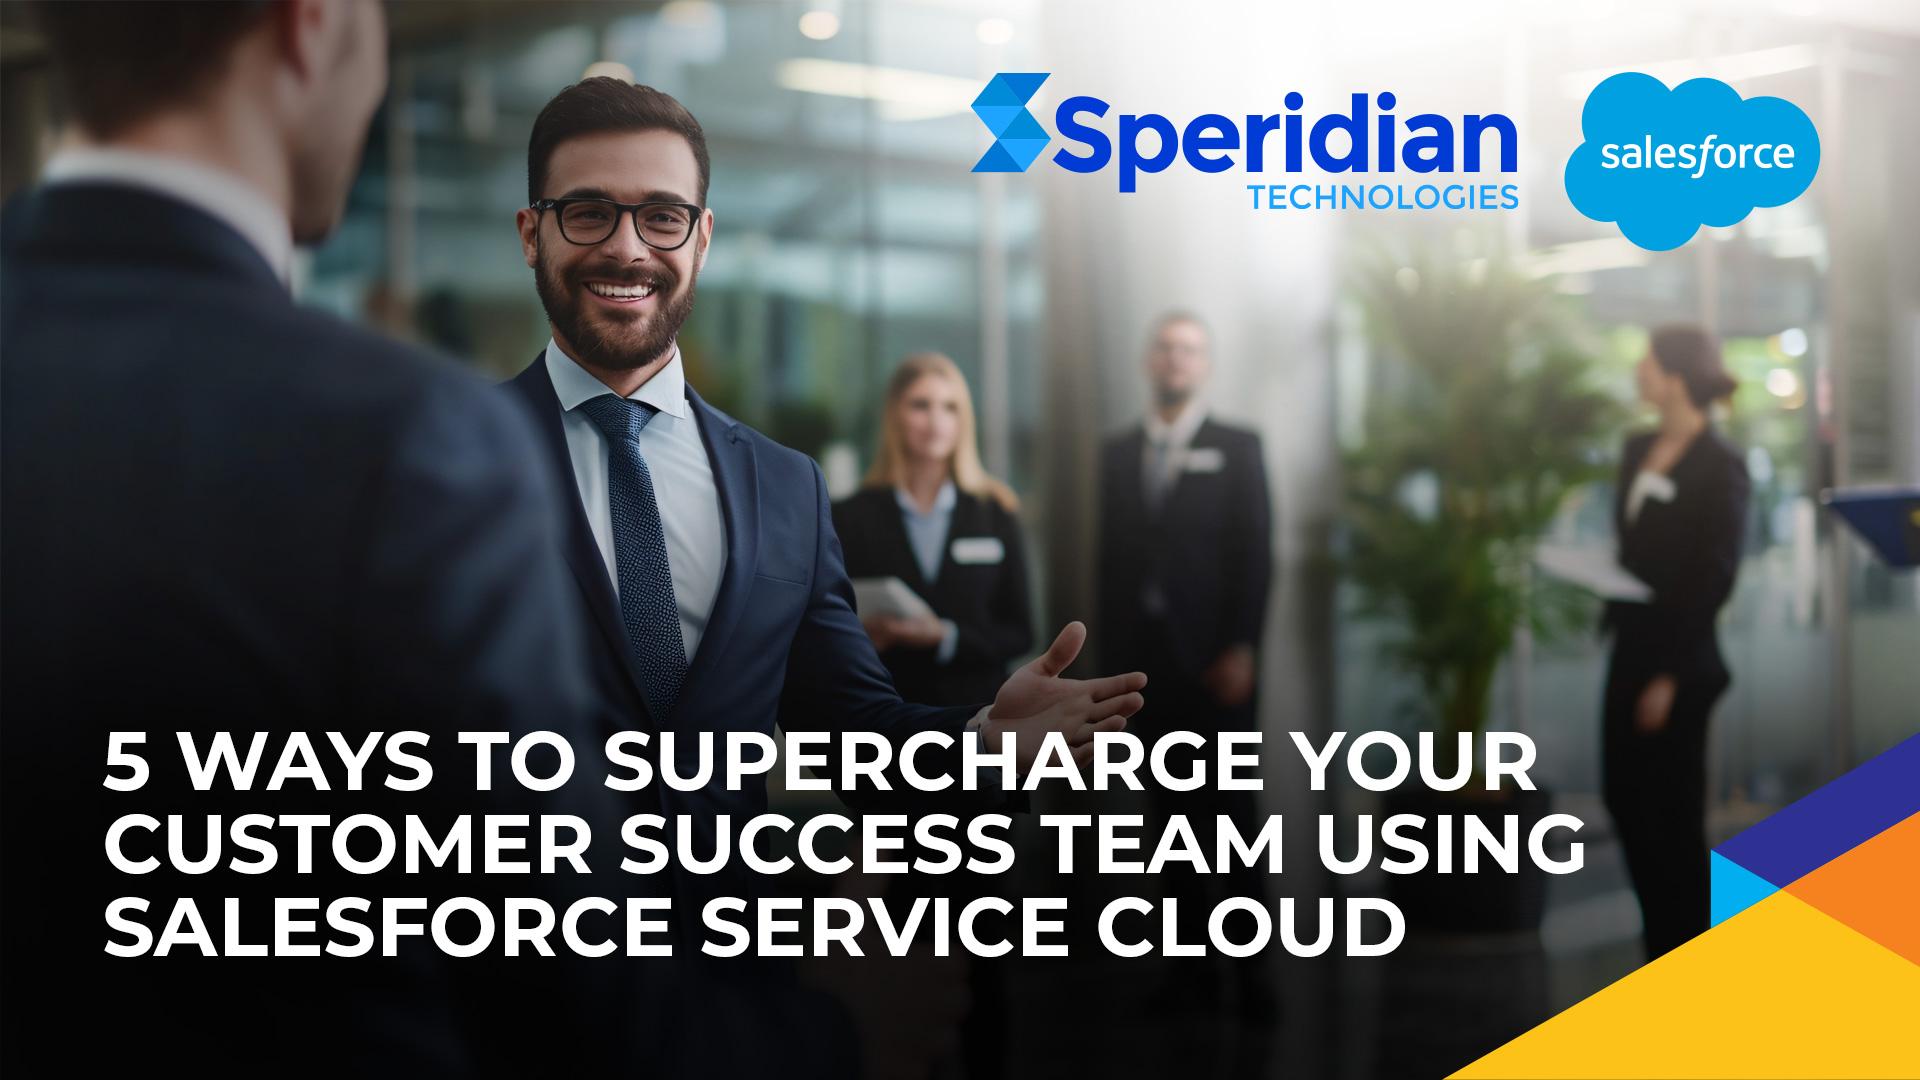 5 Ways to Supercharge Your Customer Success Team Using Salesforce Service Cloud